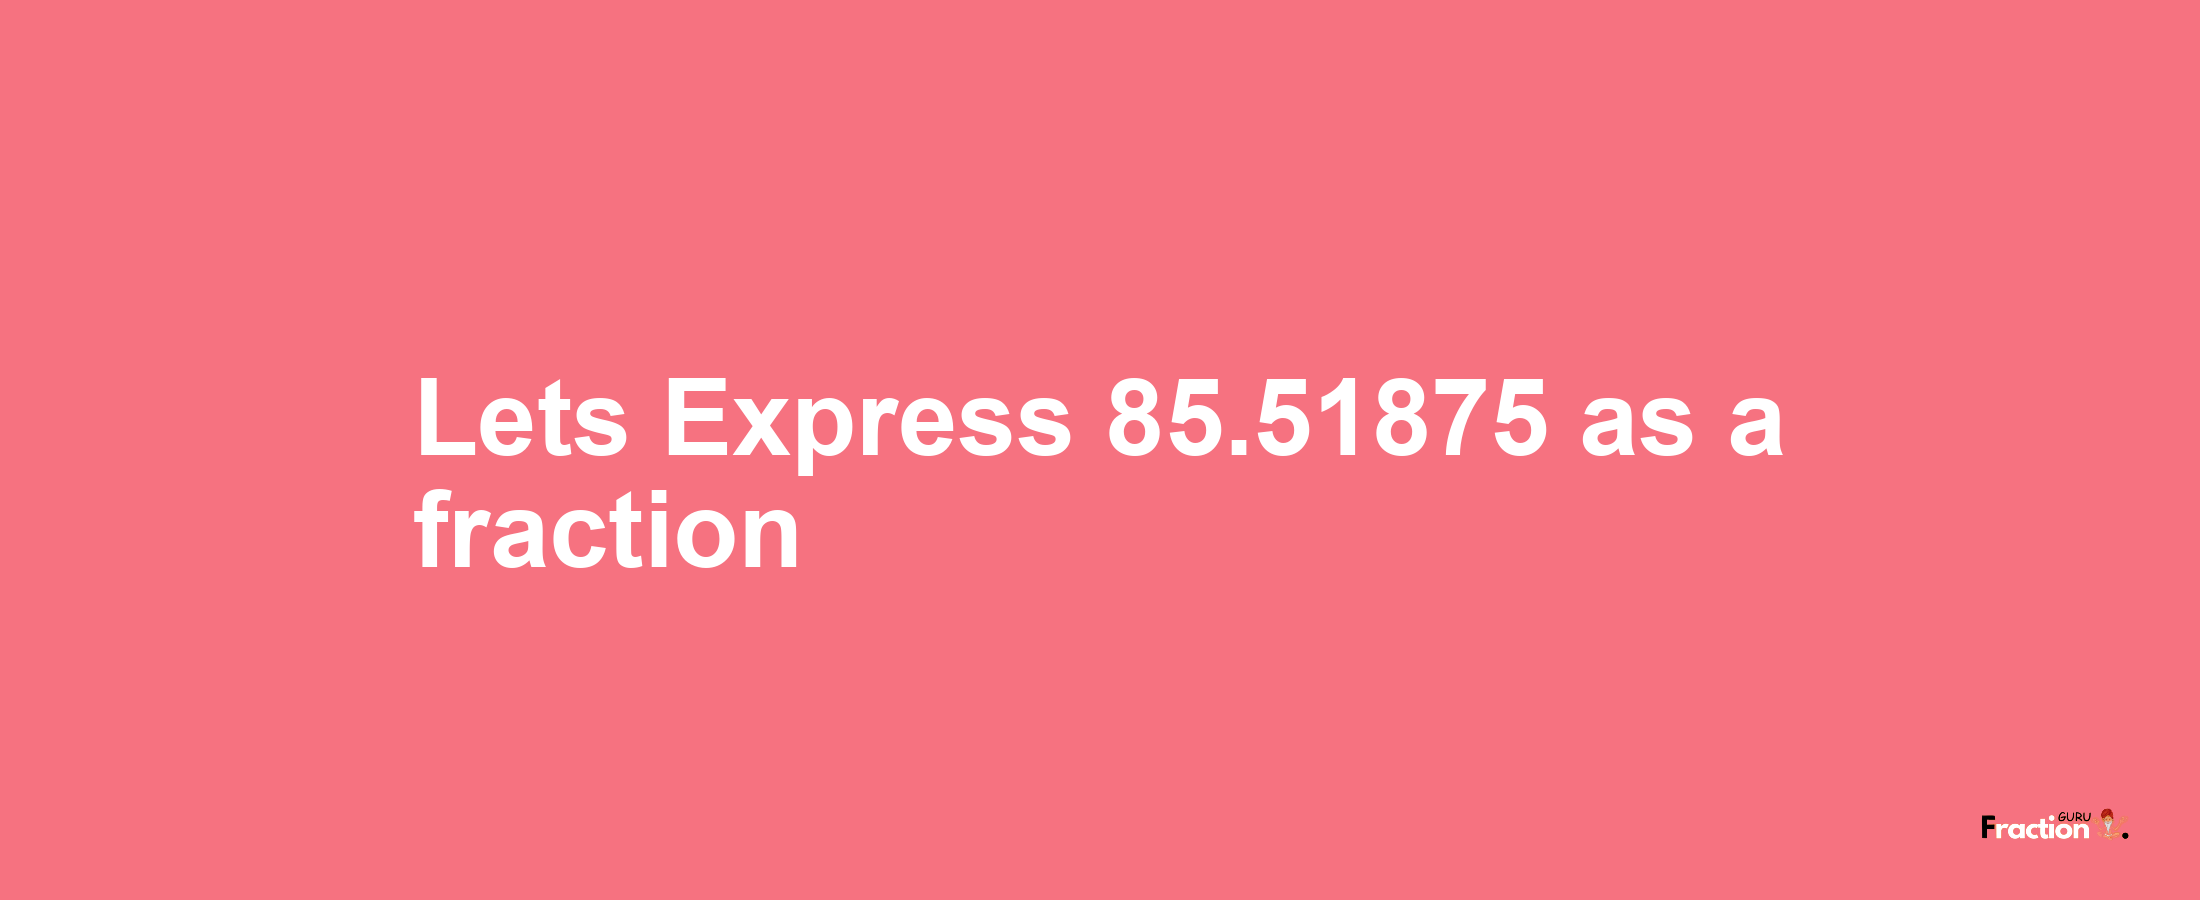 Lets Express 85.51875 as afraction